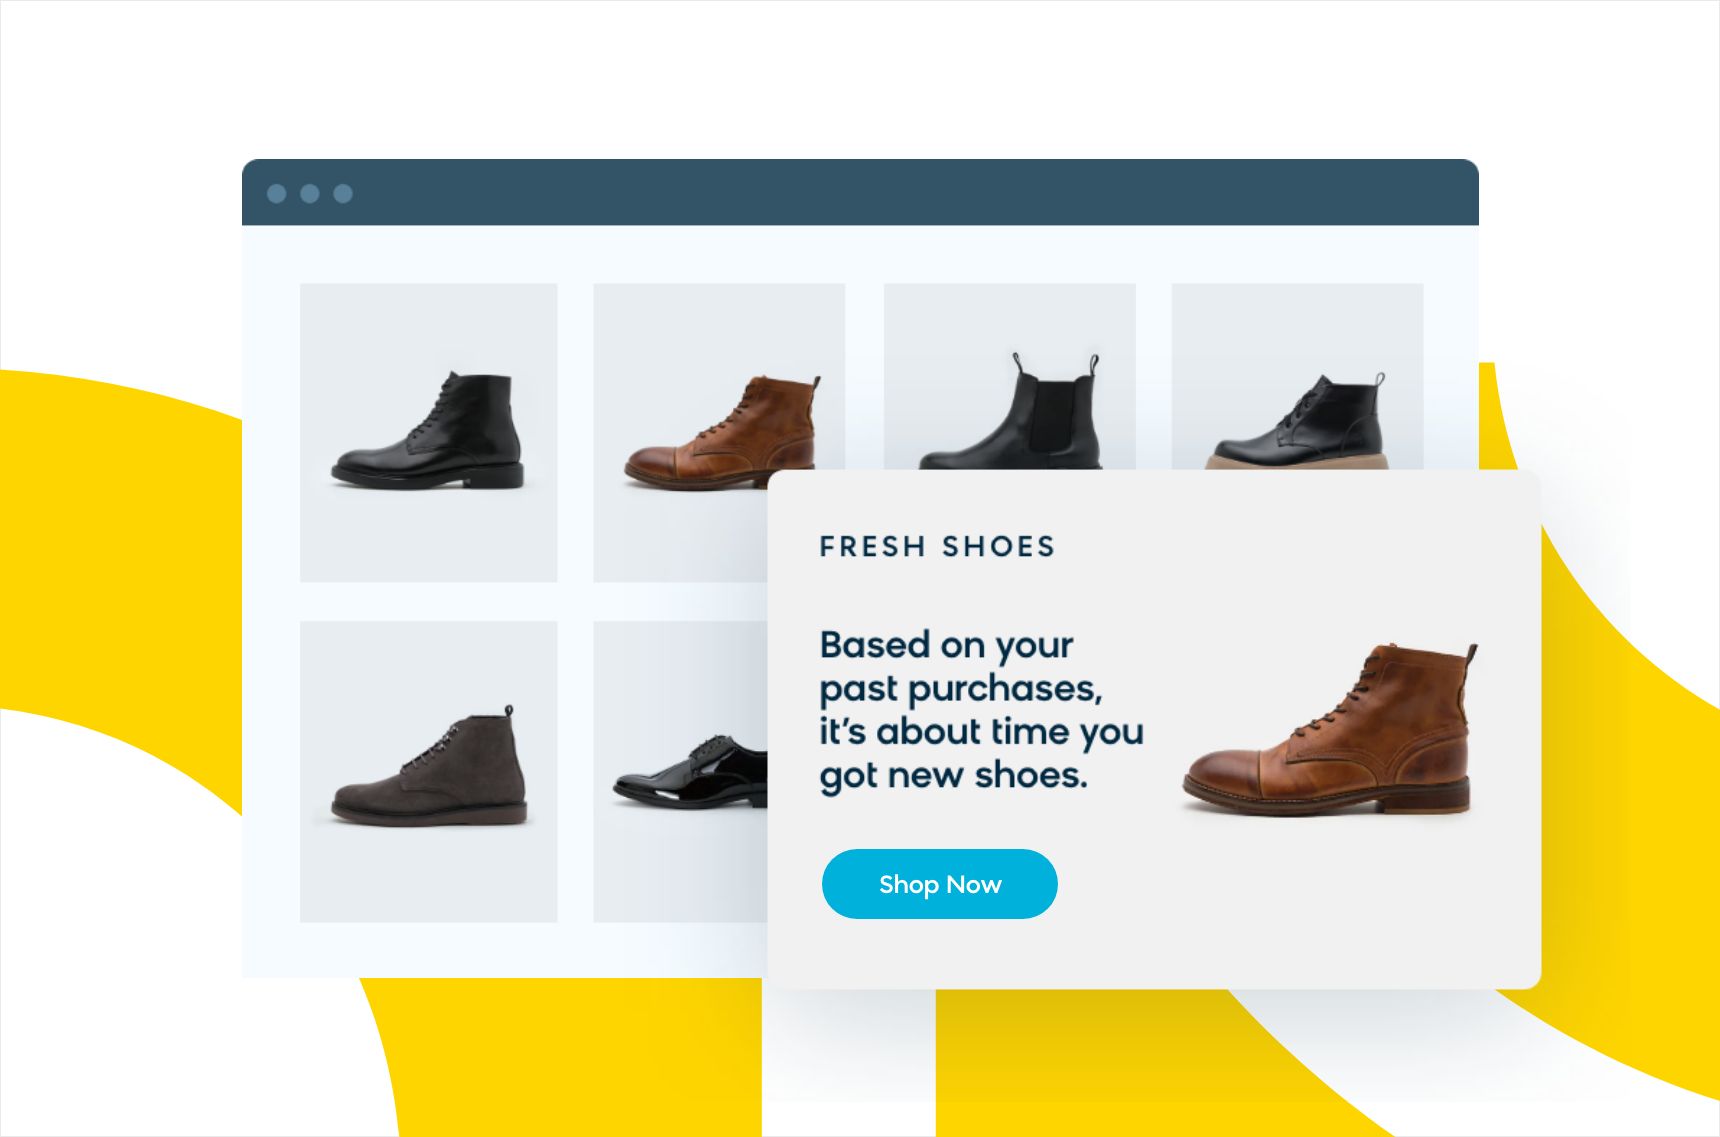 A marketing message that shows similar products based on a customer's previous shopping behavior, which invites users to increase engagement with a brand